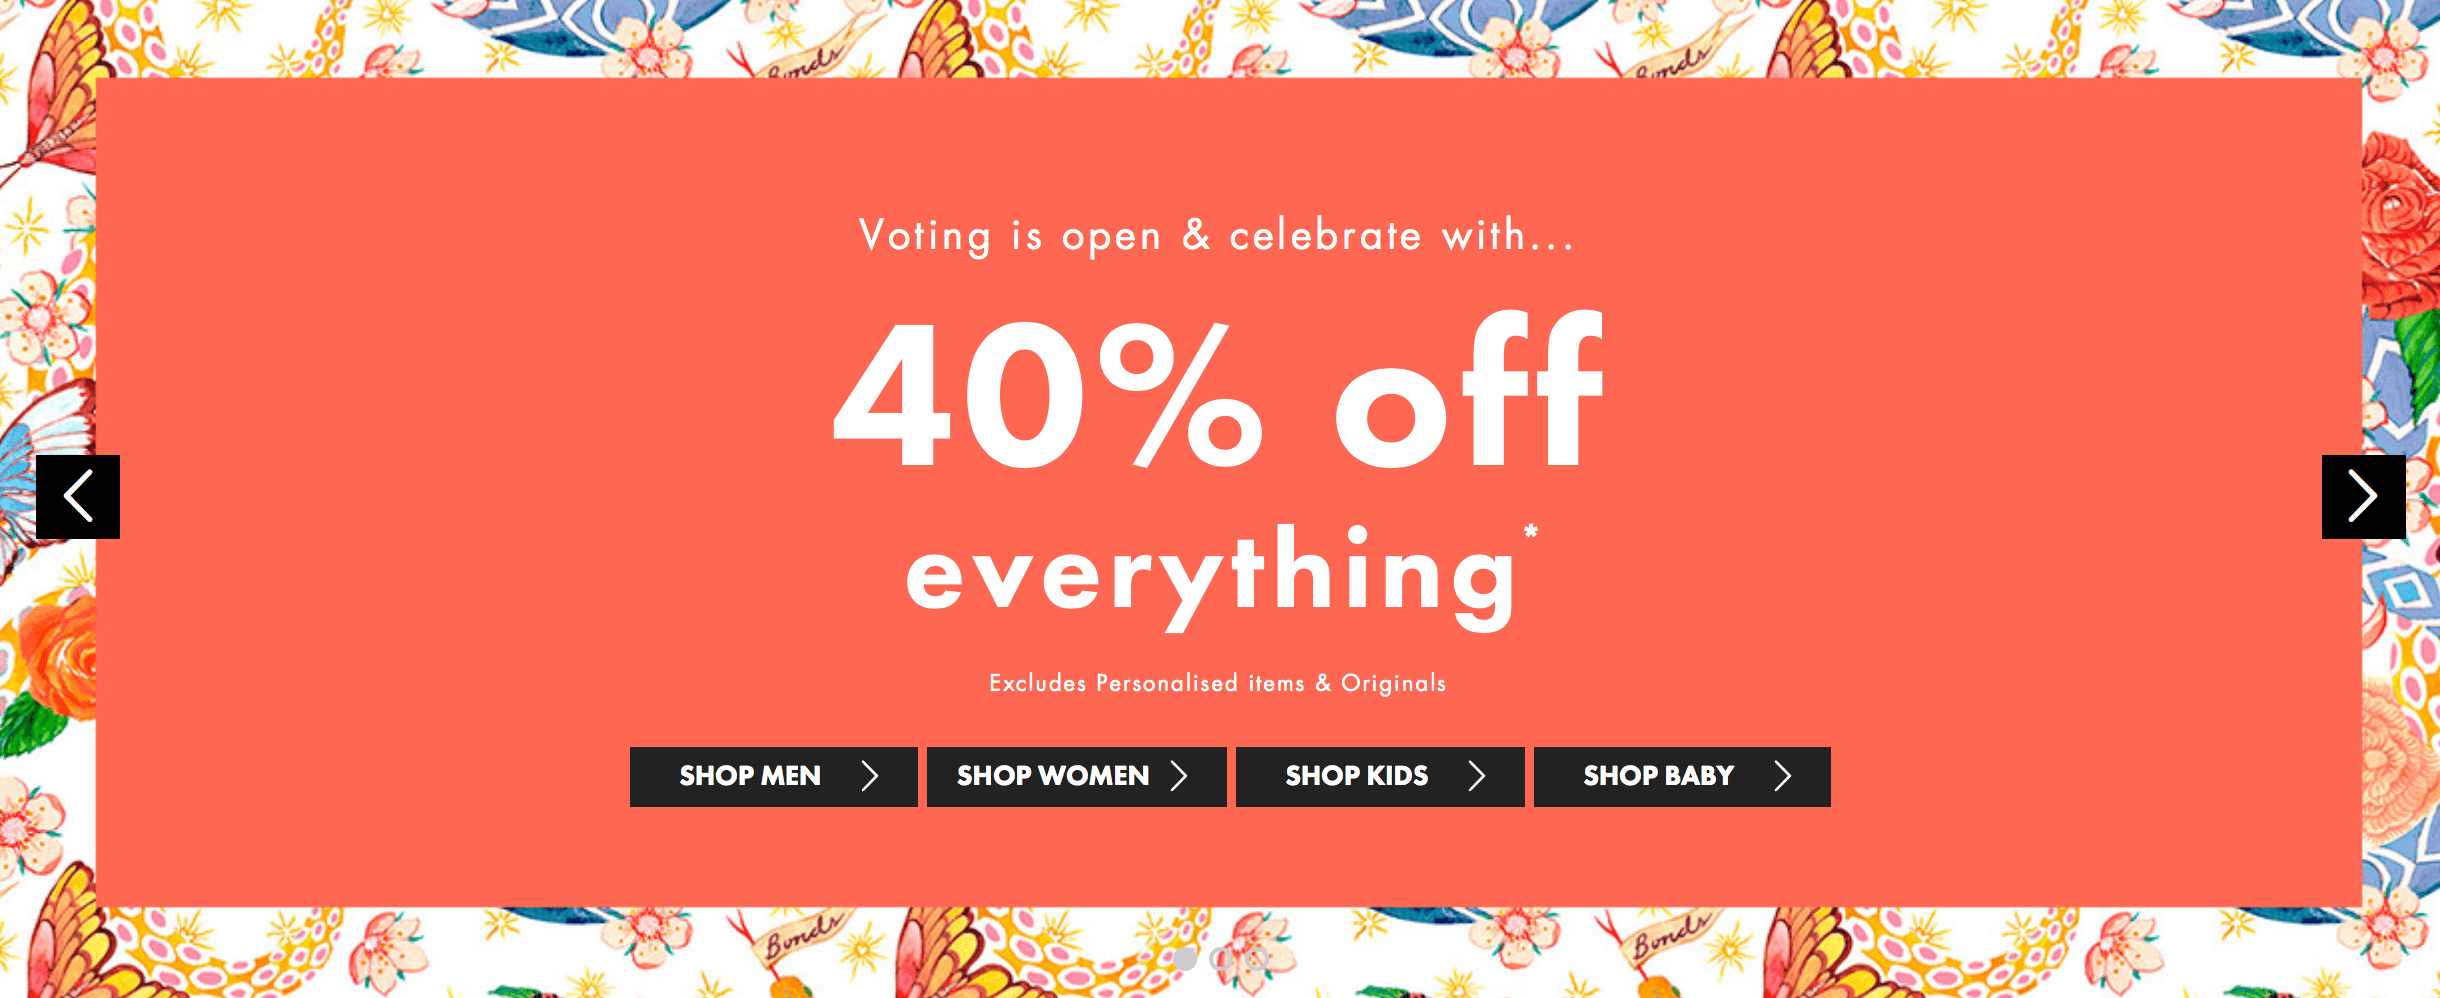 Voting is open and celebrate with... 40% off everything